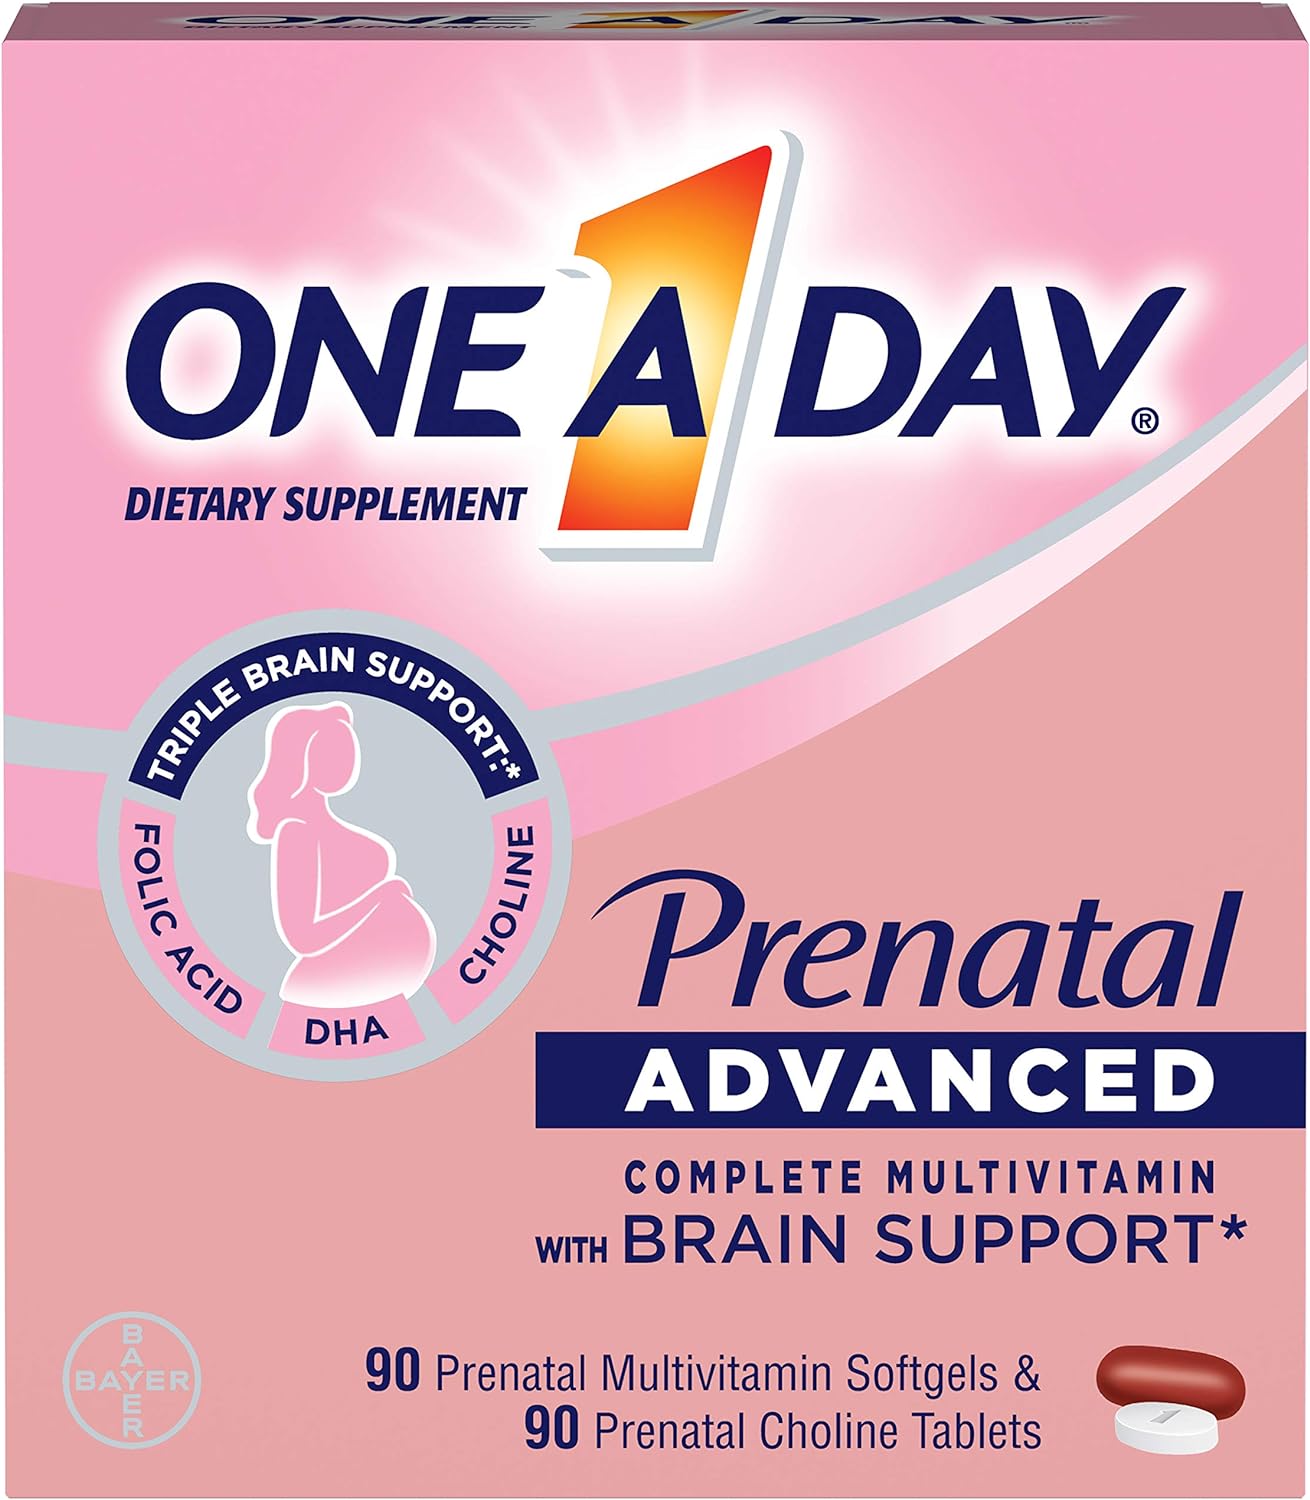 One A Day Women’s Prenatal Advanced Complete Multivitamin with Brain Support* with Choline, Folic Acid, Omega-3 DHA  Iron for Pre, During and Post Pregnancy, 90+90 Count, (180 Count Total Set)